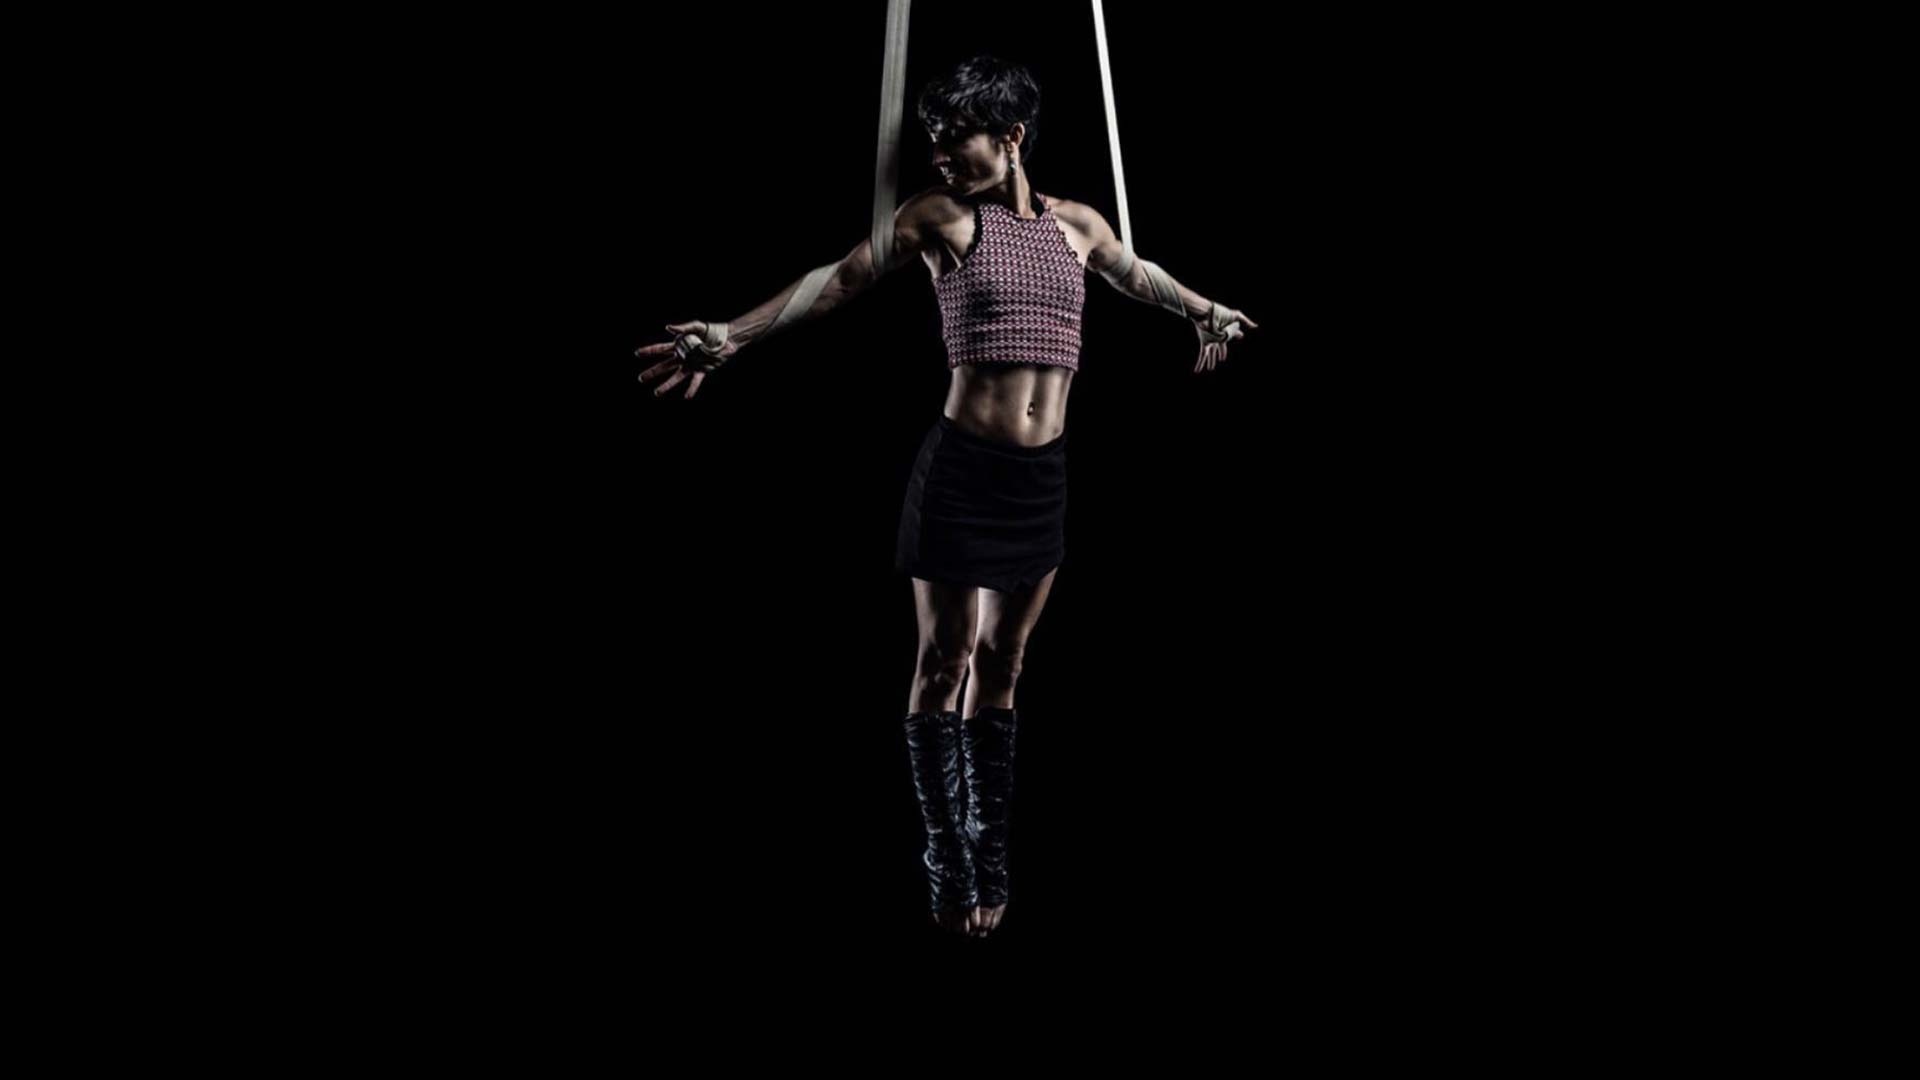 Aerial Silks: A professional gymnast performs in the darkness, An amazing circus event. 1920x1080 Full HD Wallpaper.